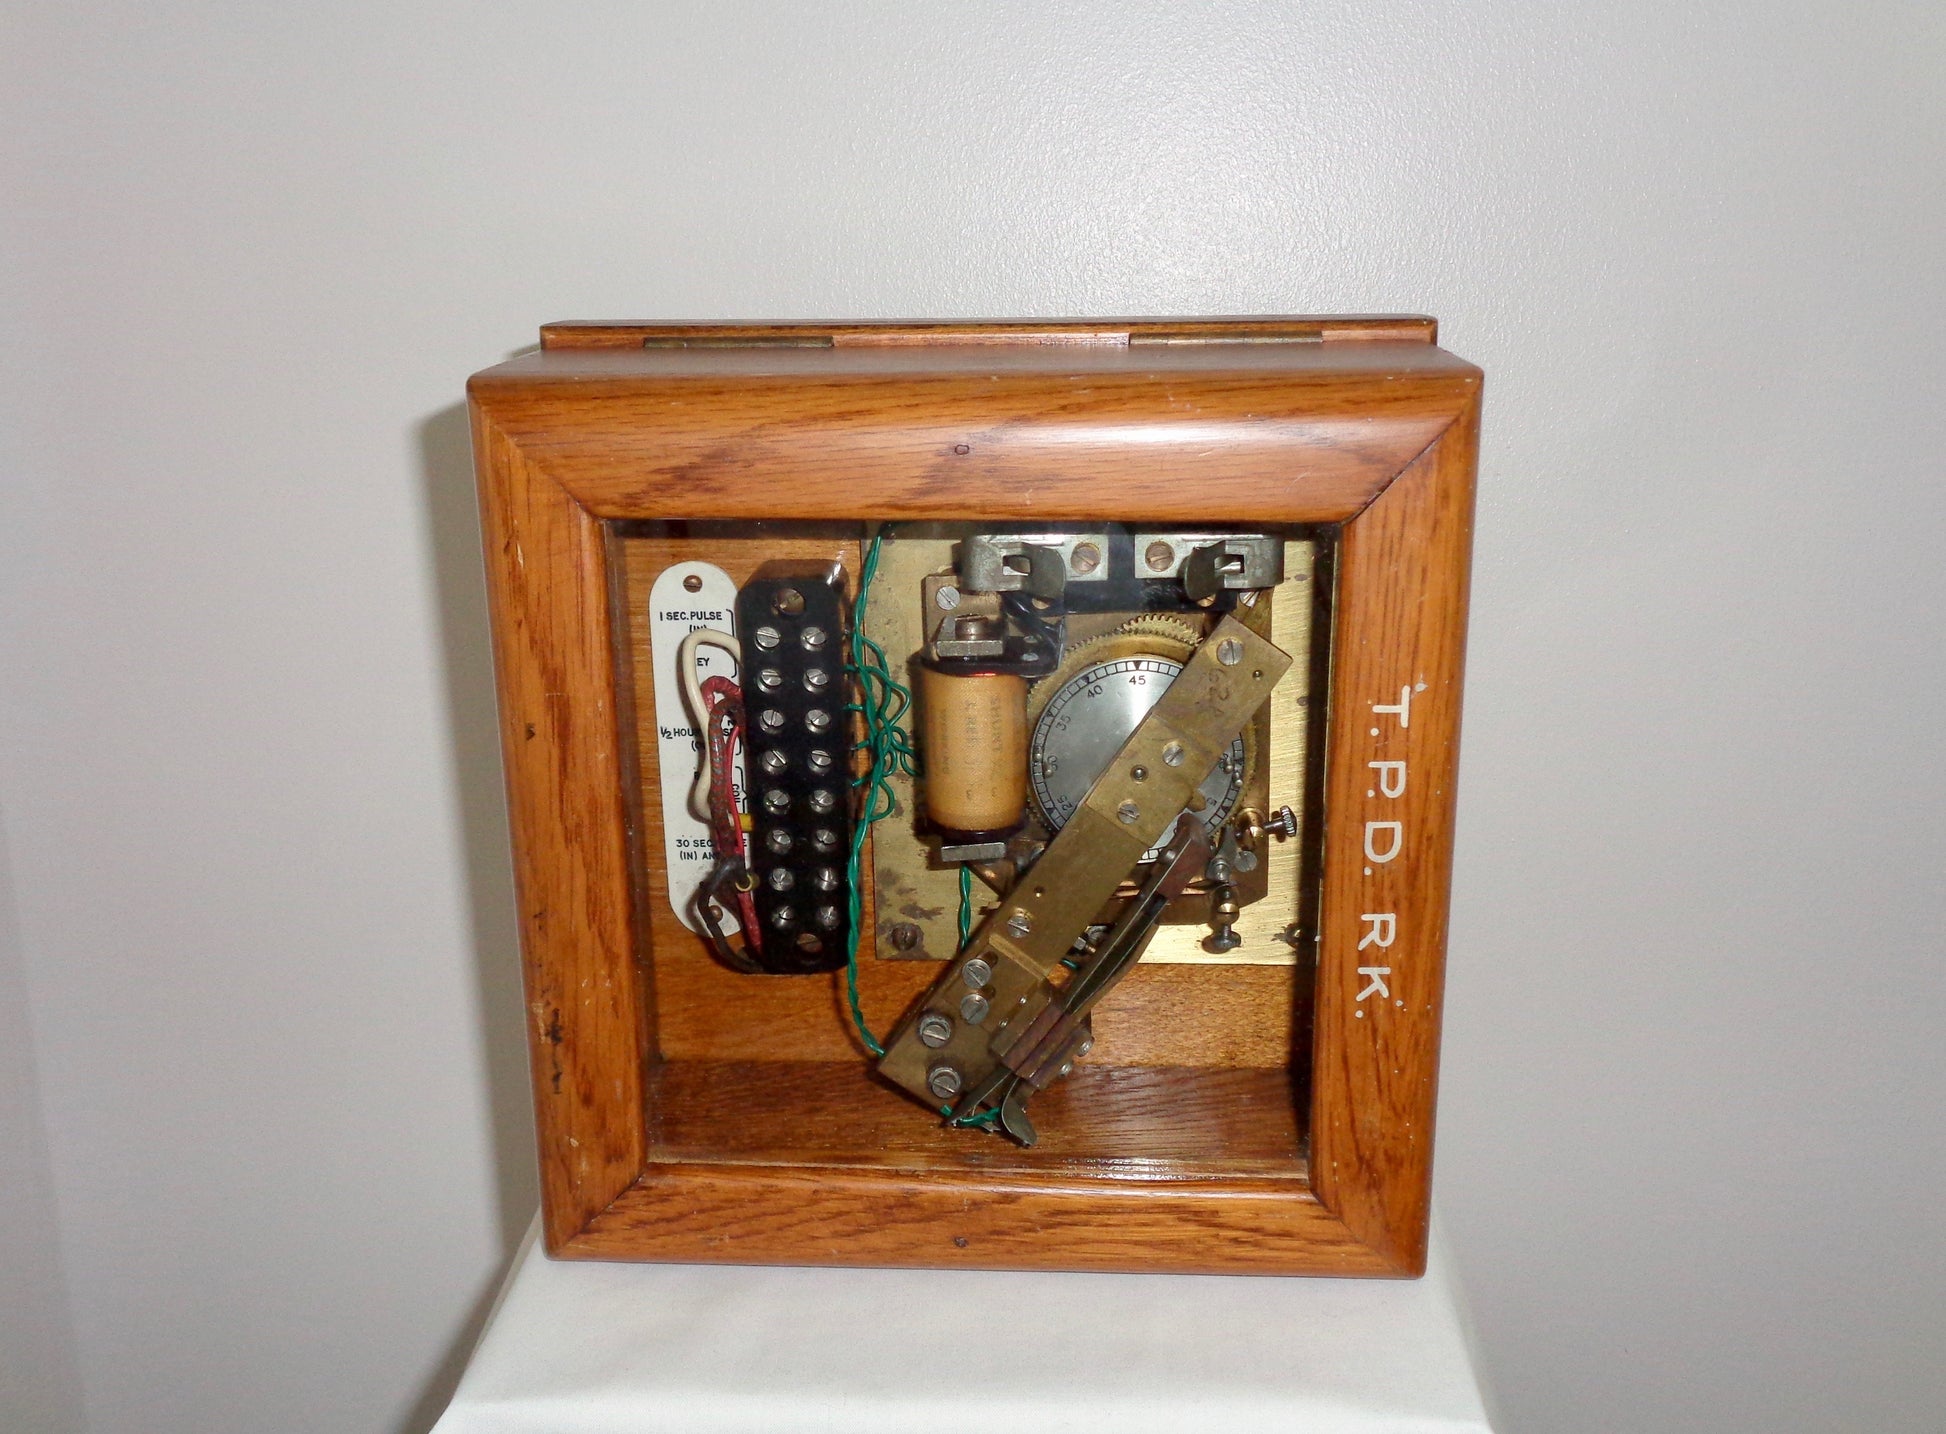 Vintage GPO Electrical Clock Pulse Type 62A